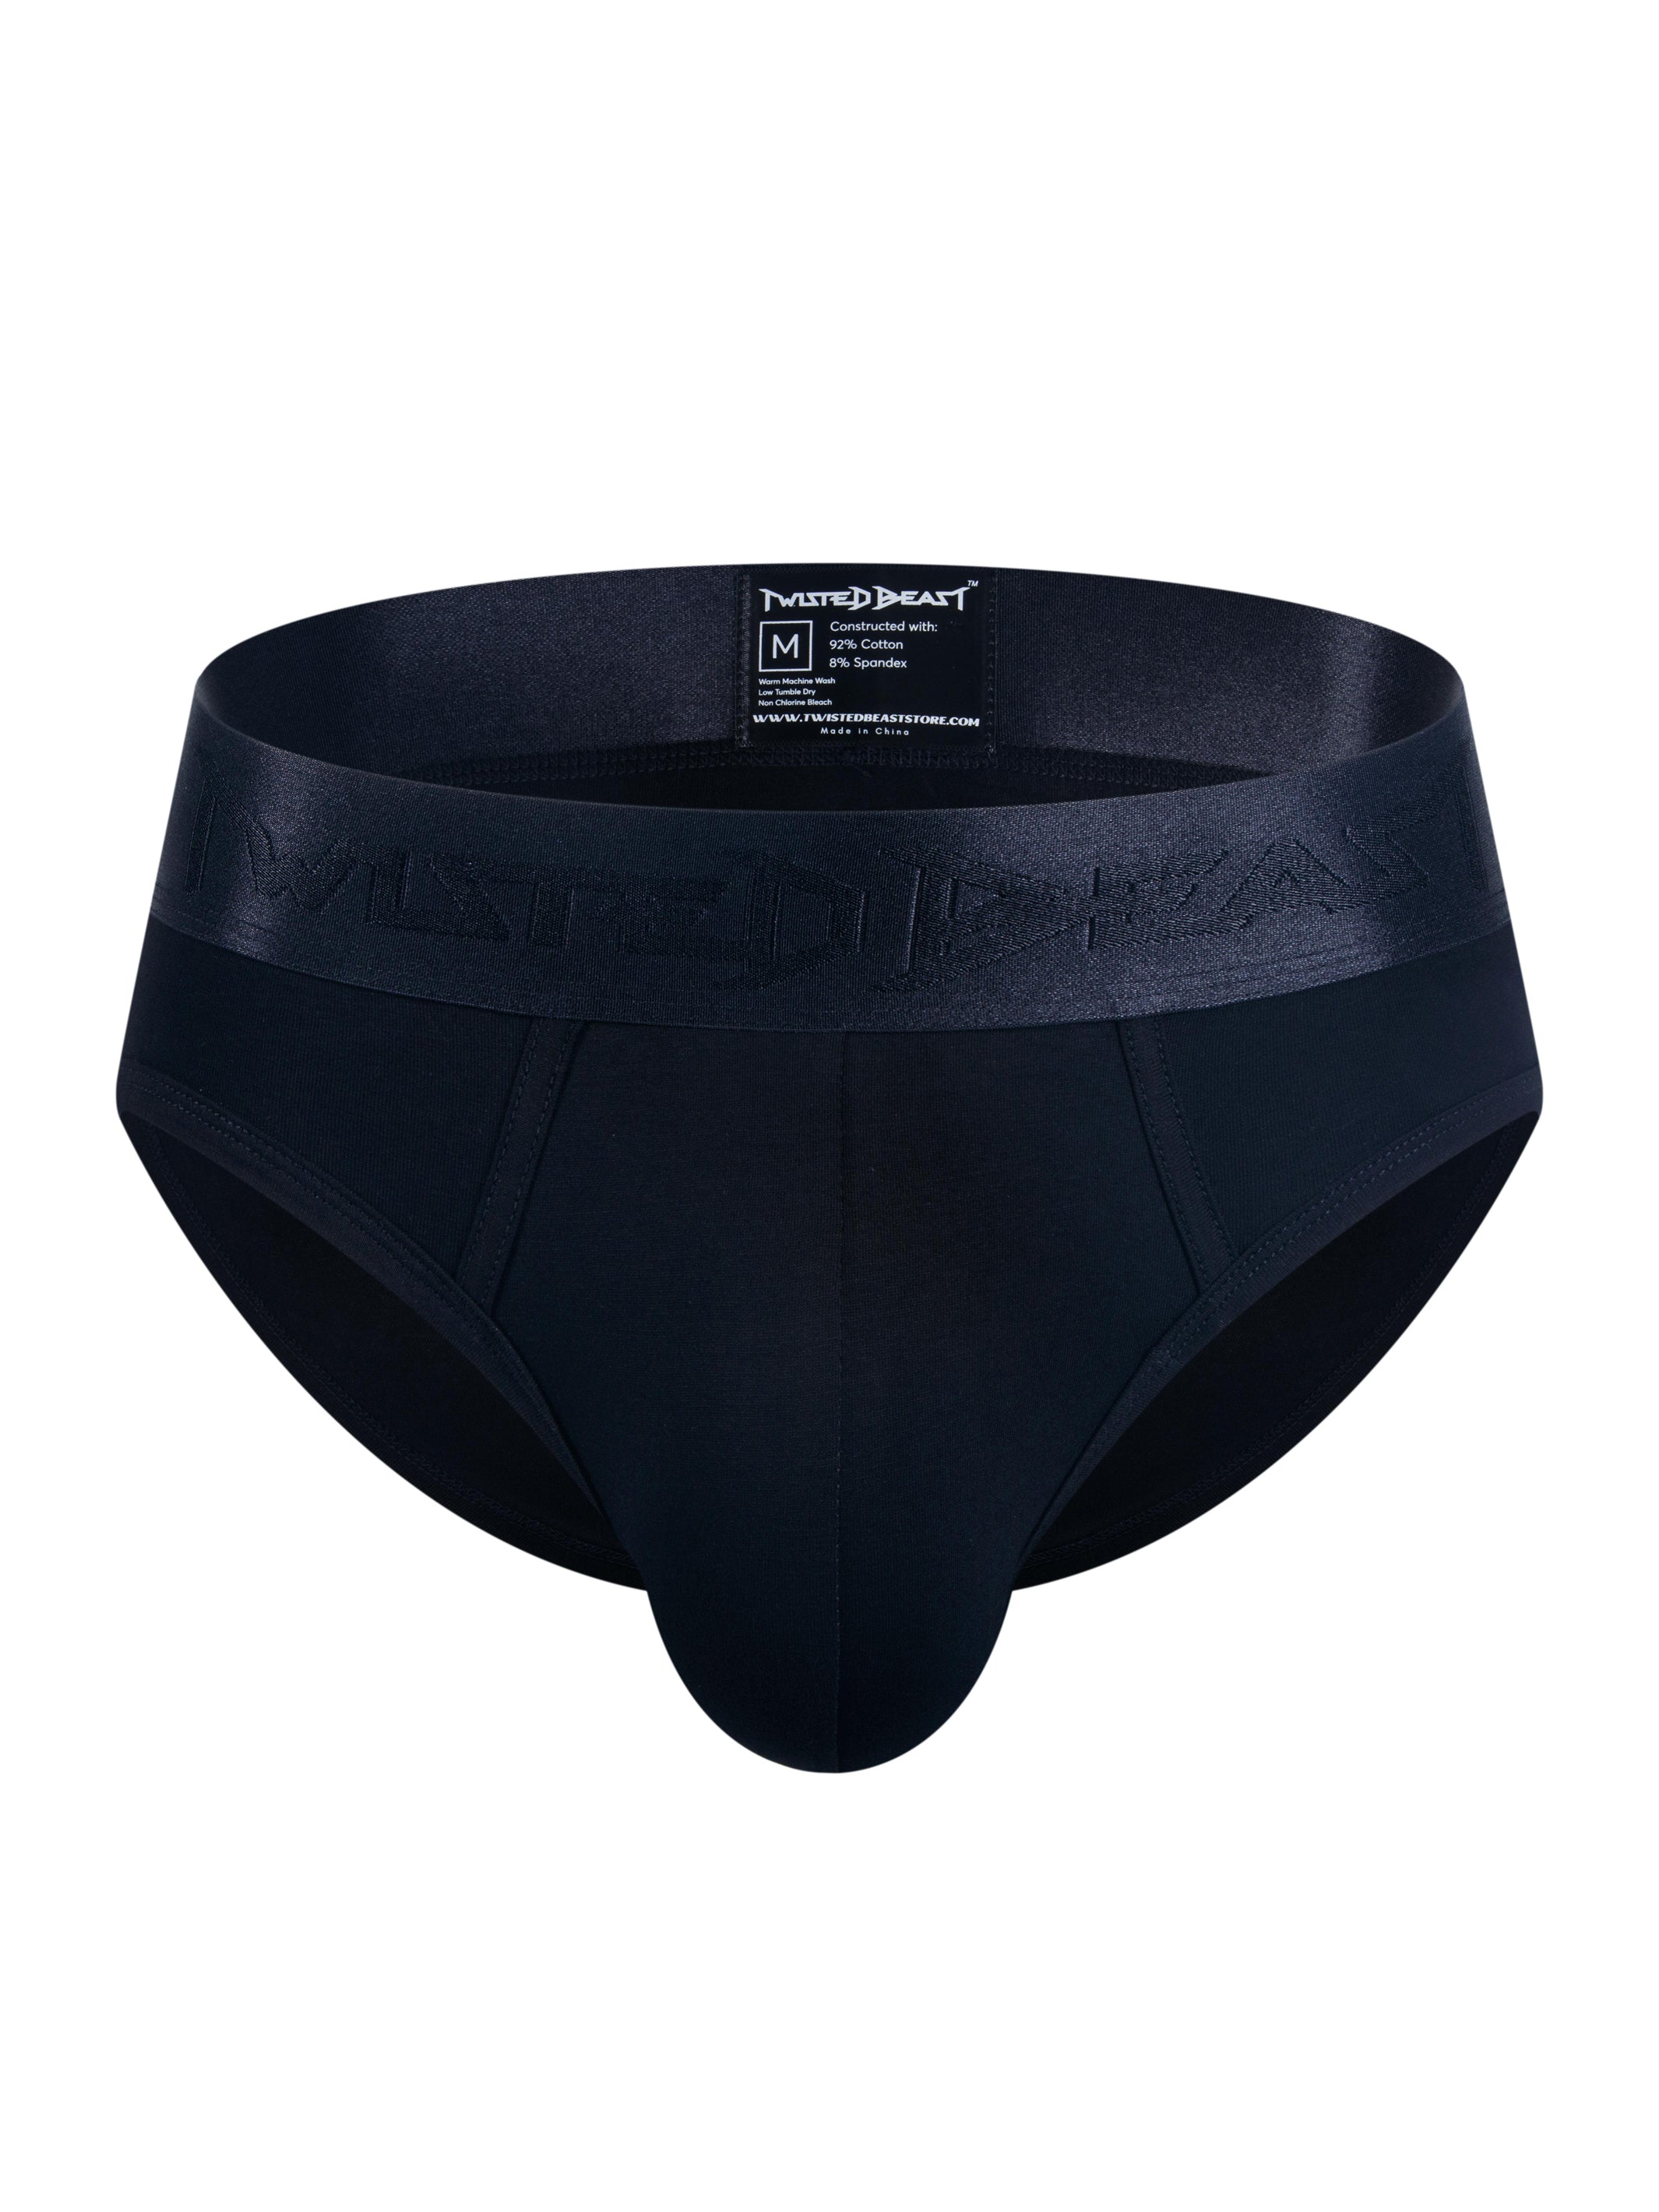 A frontal product photo of a pair of Phantom Briefs.